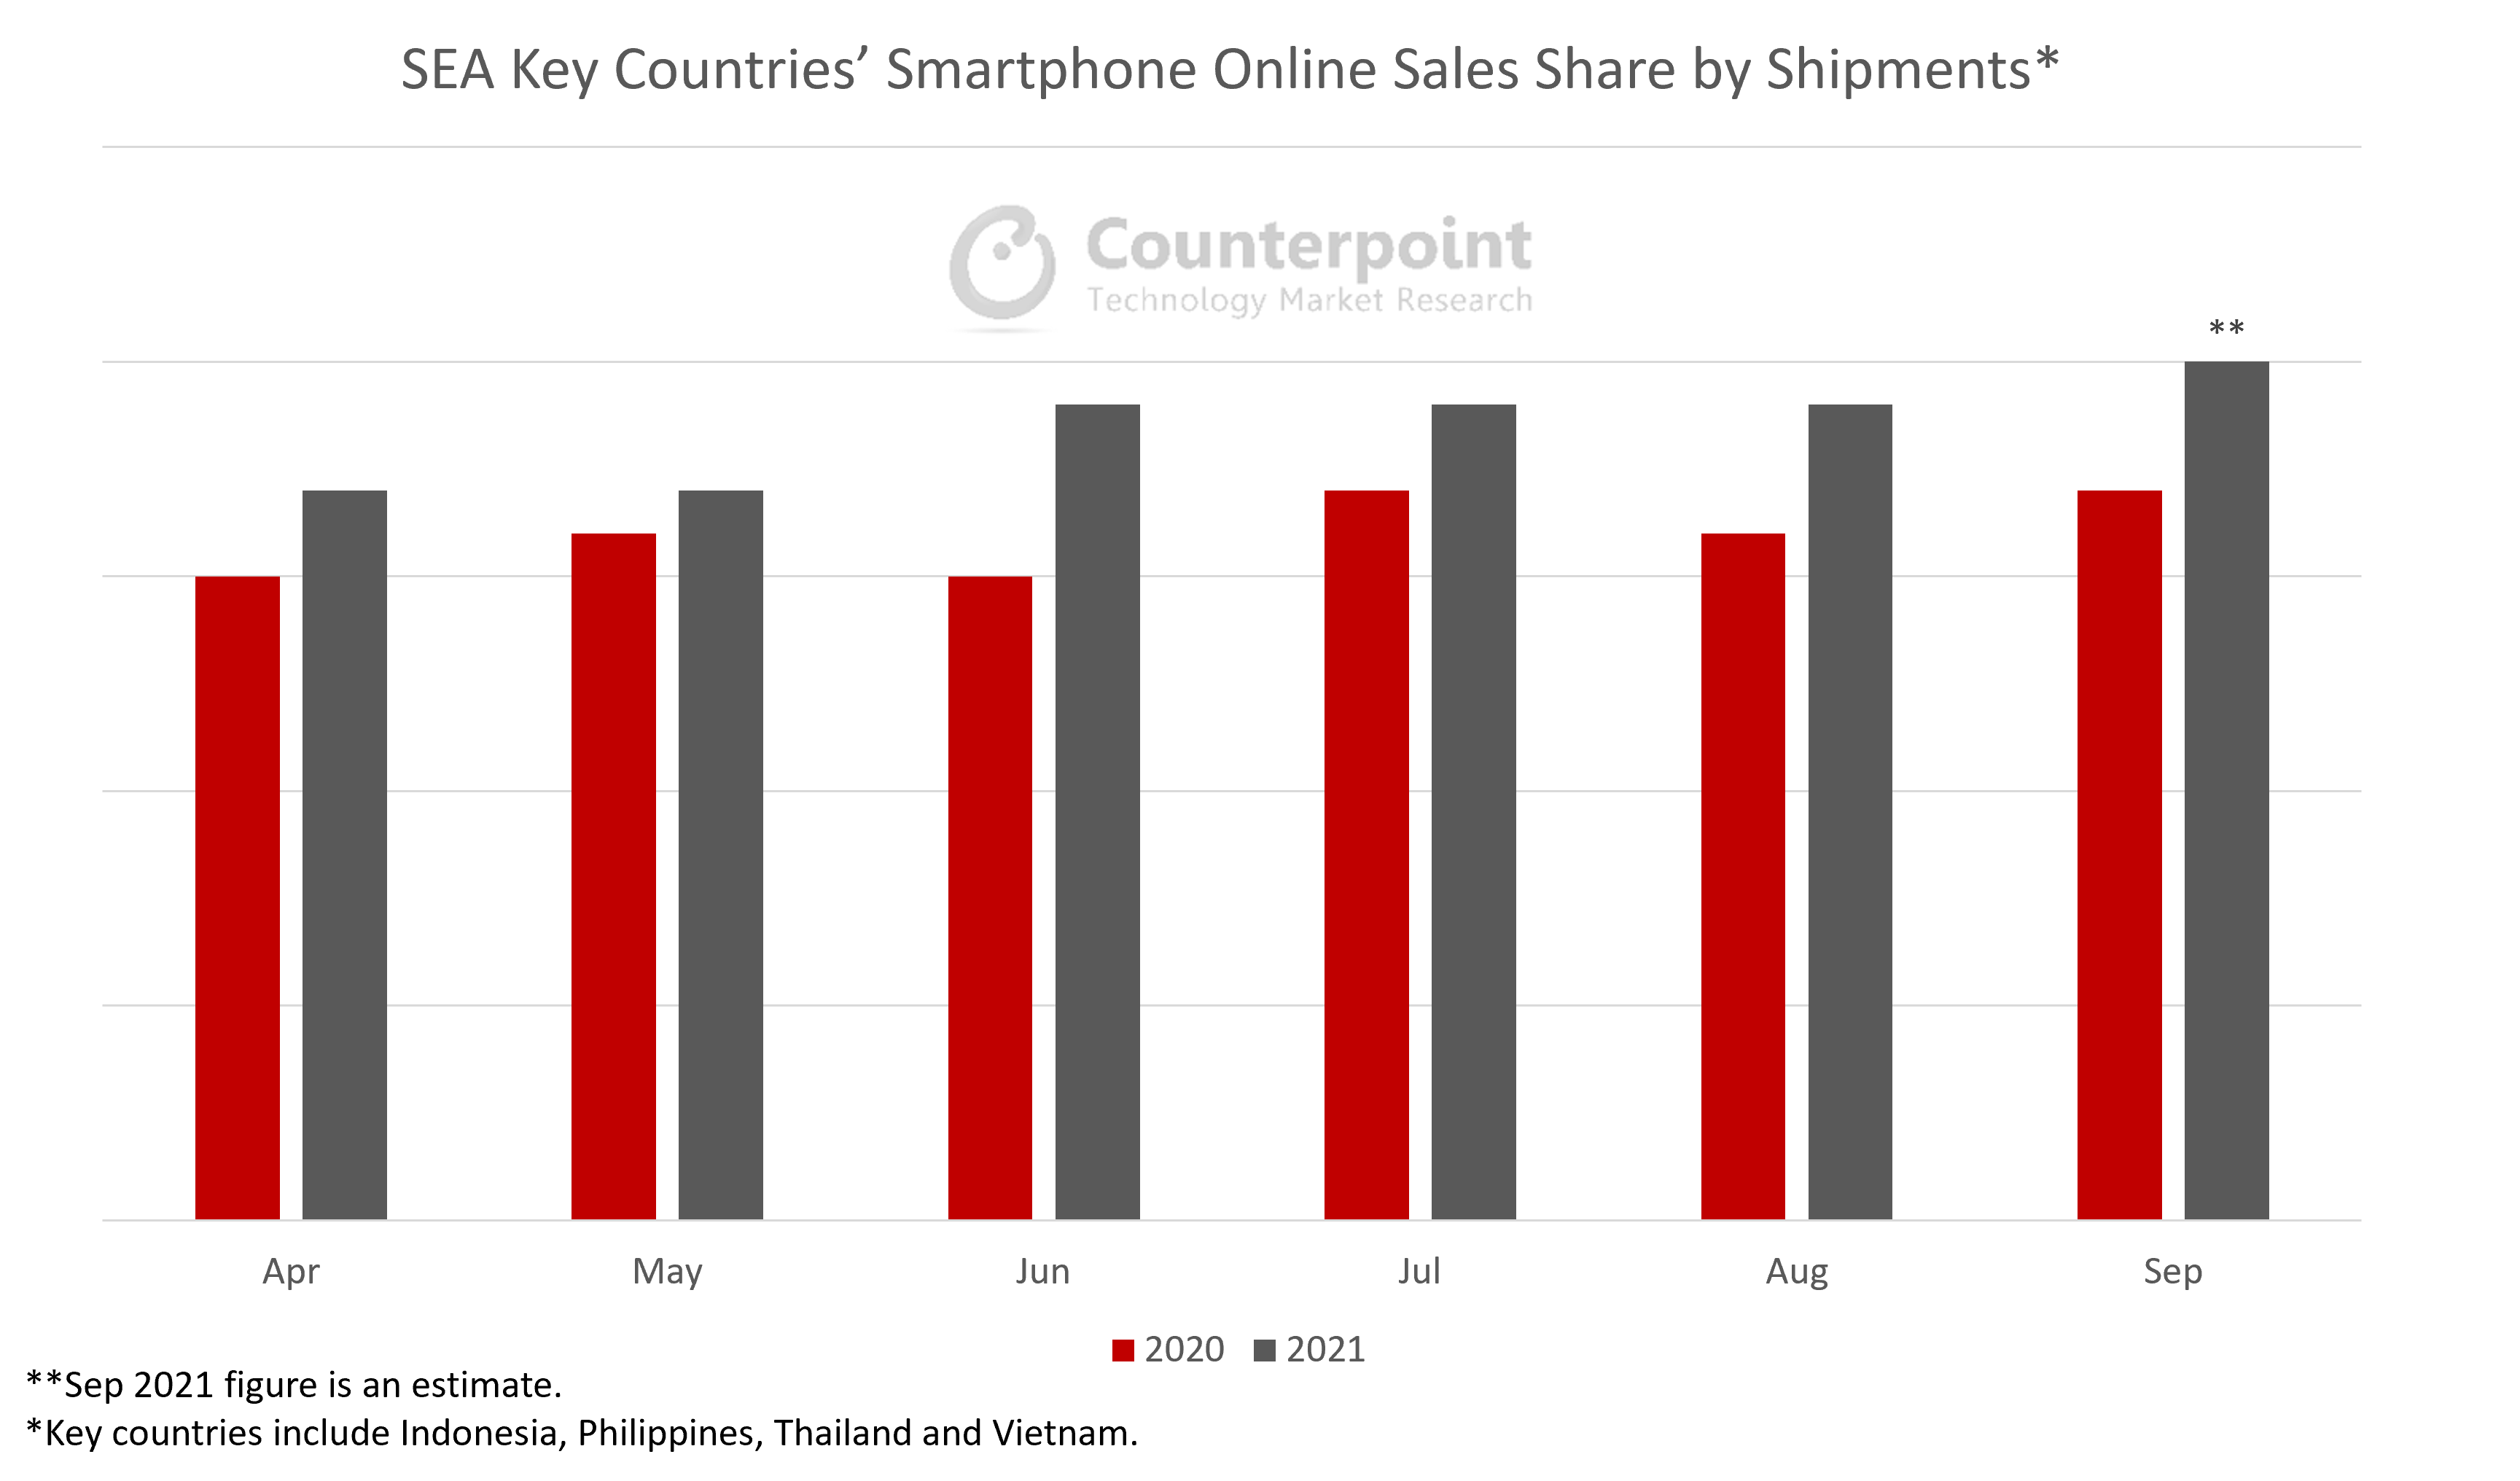 Counterpoint Research SEA Key Countries’ Smartphone Online Sales Share by Shipments